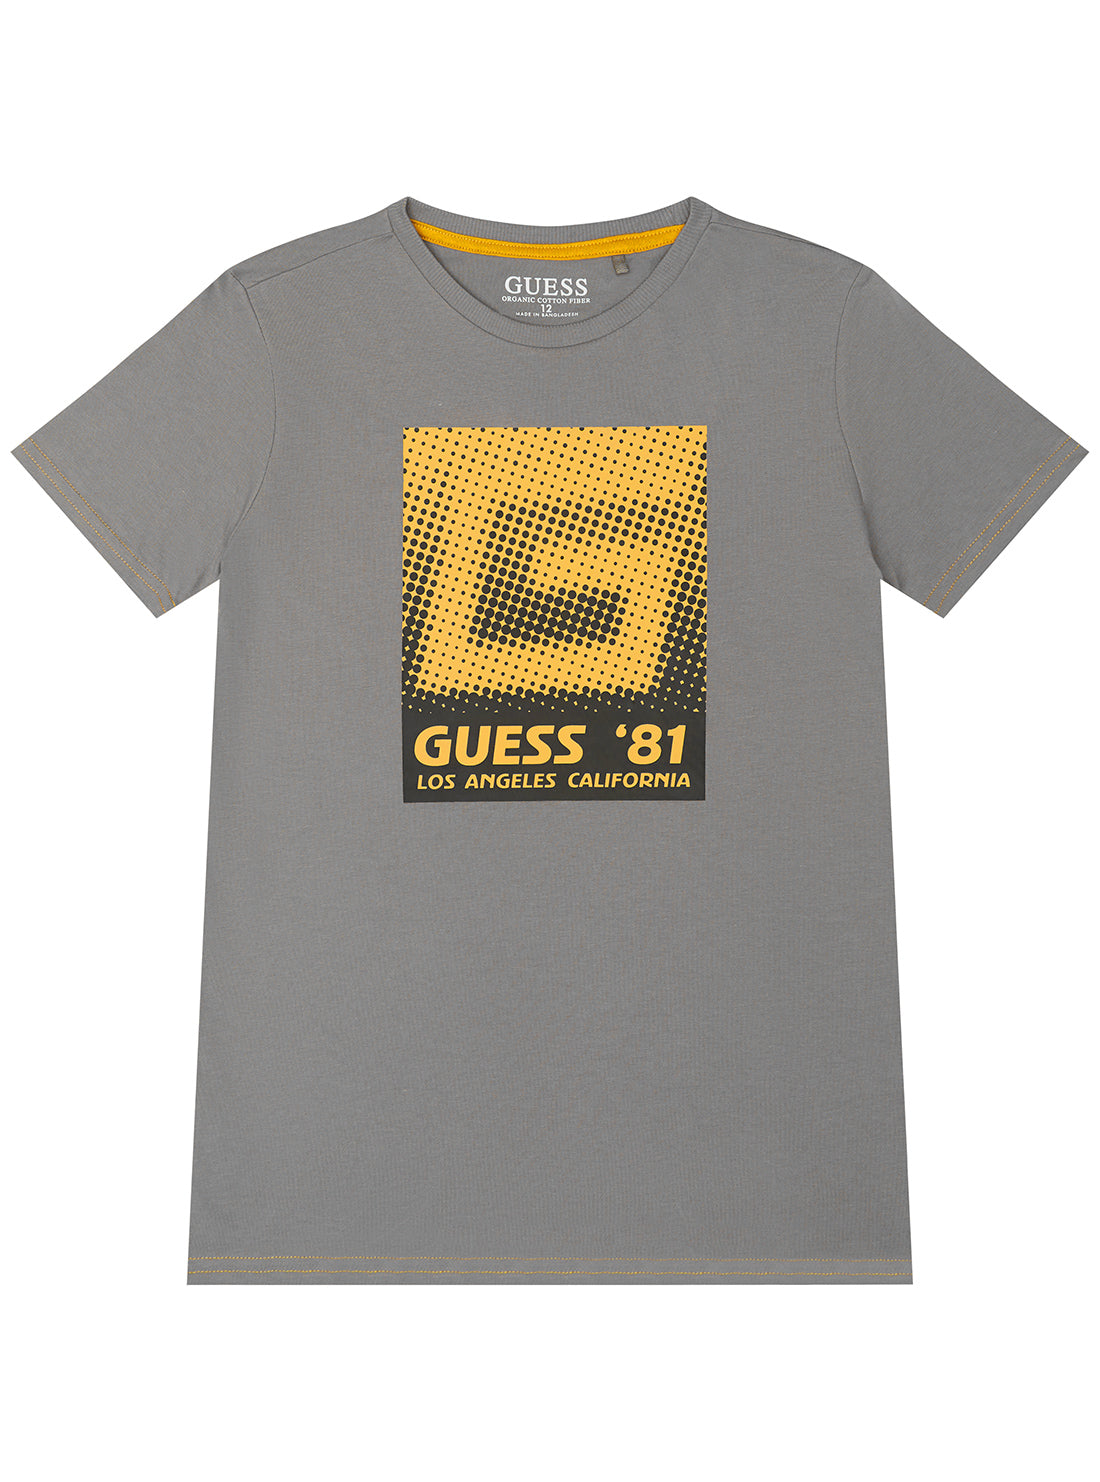 GUESS Steel Graphic Logo T-Shirt (7-16) front view